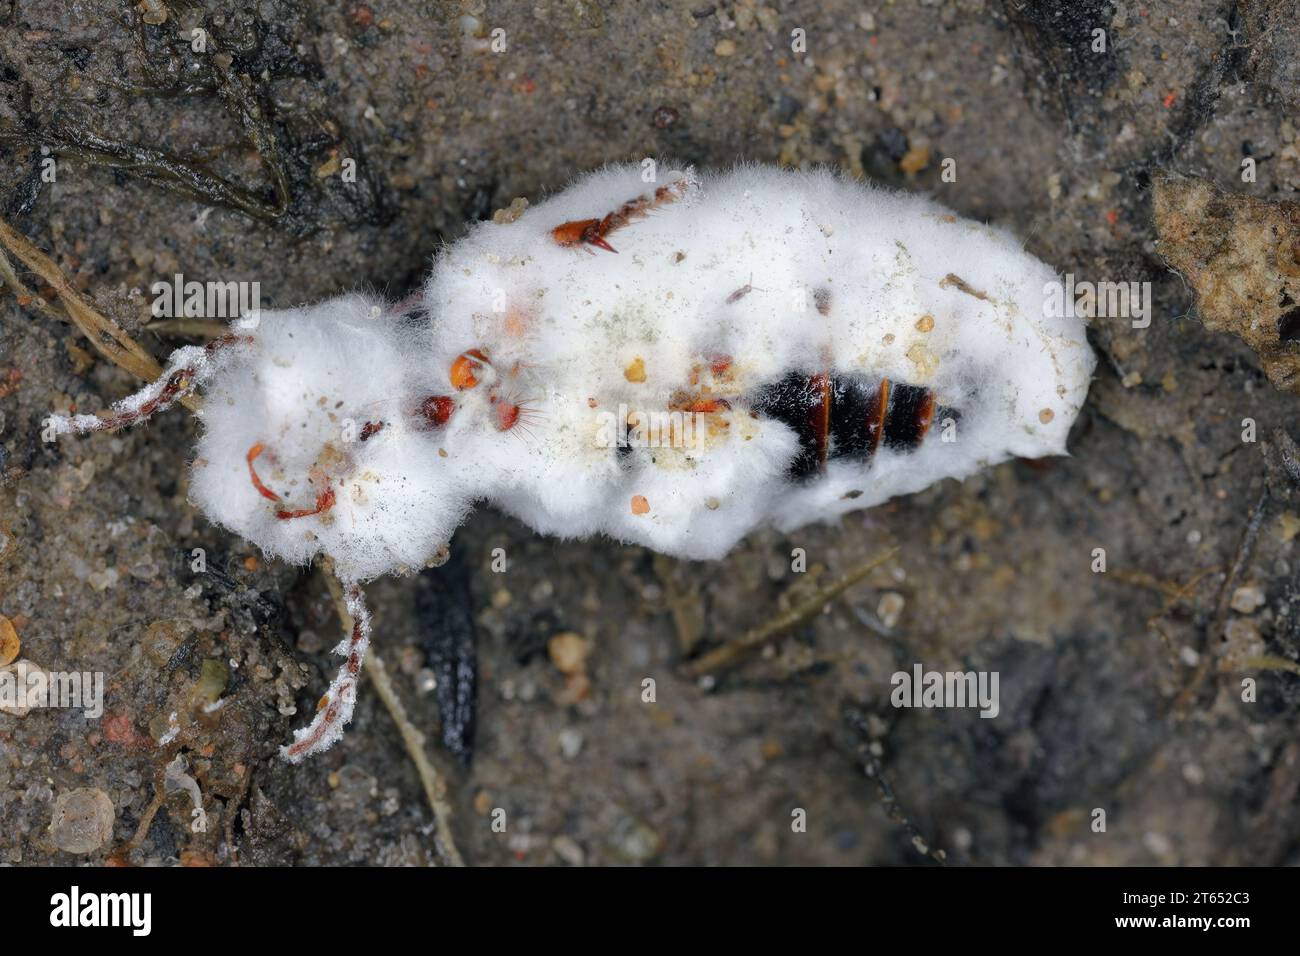 Beetle infected by an entomopathogenic fungus Beauveria bassiana a parasite on various arthropod species, causing white muscardine disease. Stock Photo